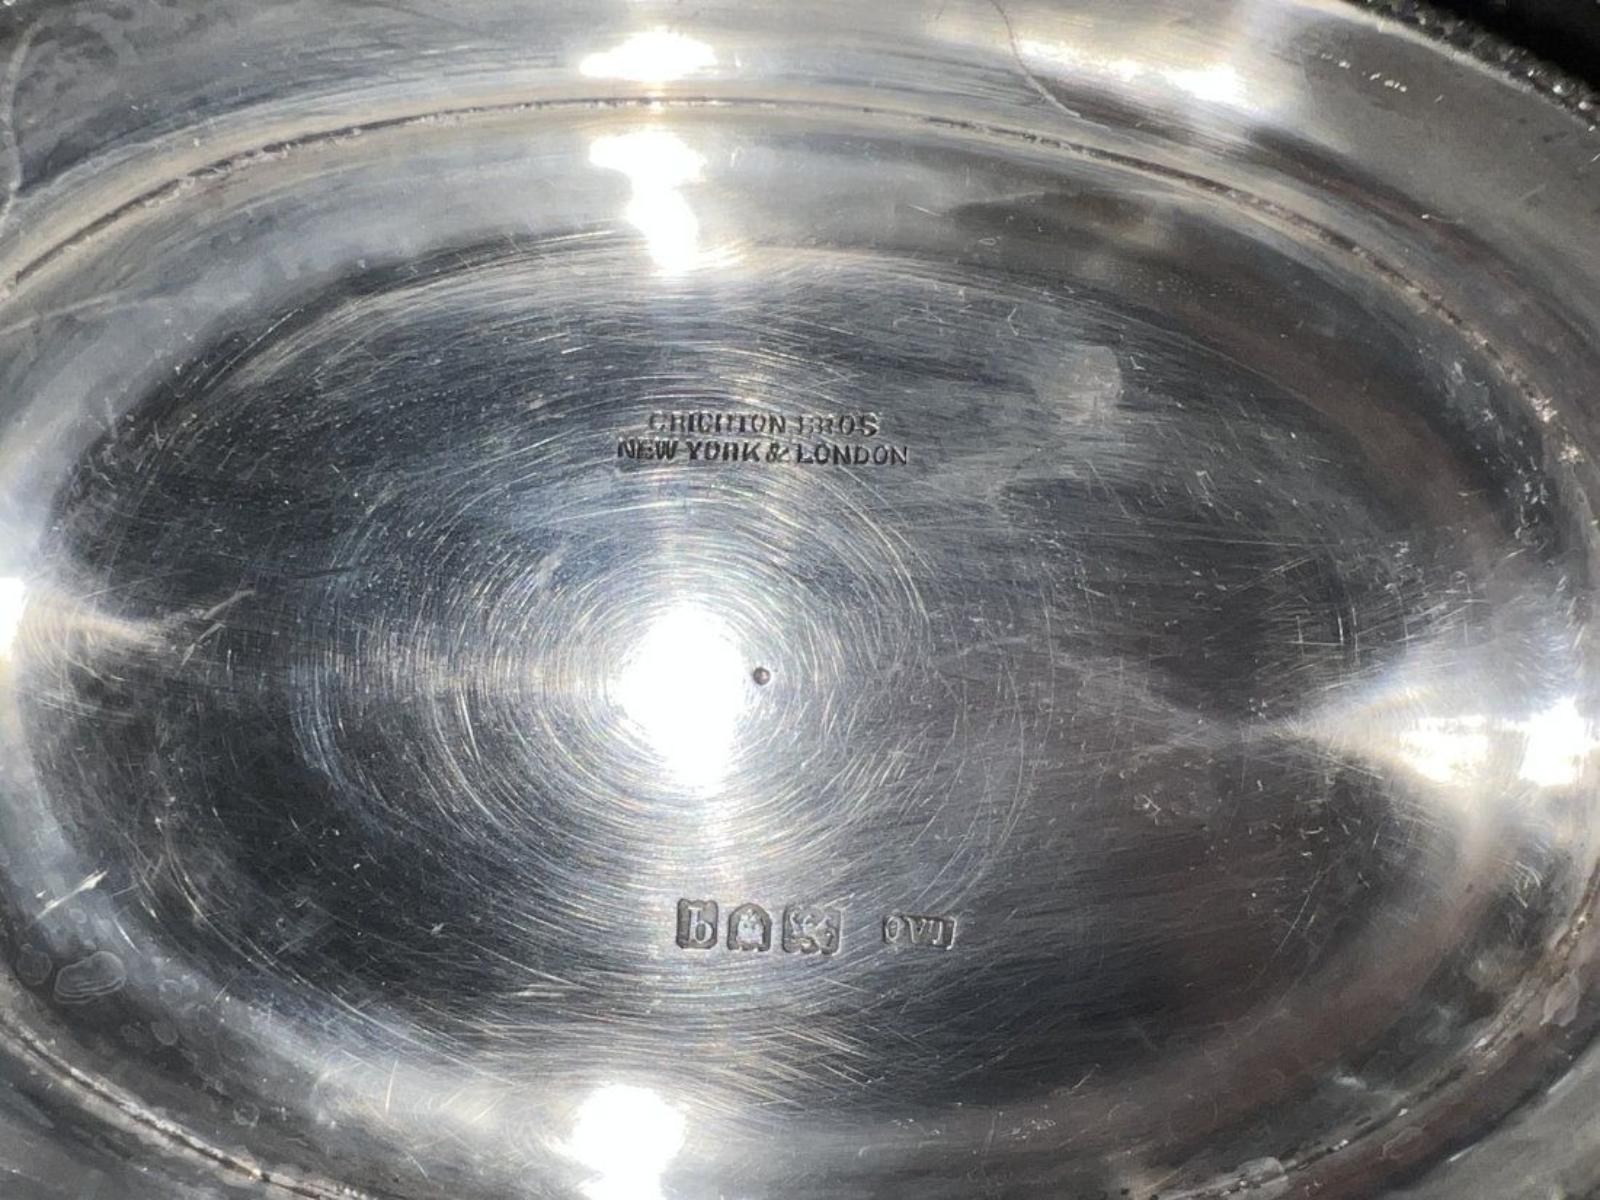 This is a magnificent 1916 English sterling silver basket made by Lionel Alfred Crichton Brothers in London. It weights 29.50 Oz. Fully signed and hallmarked. It has a wonderful detail, design and workmanship. Georgian-style ovular sterling silver